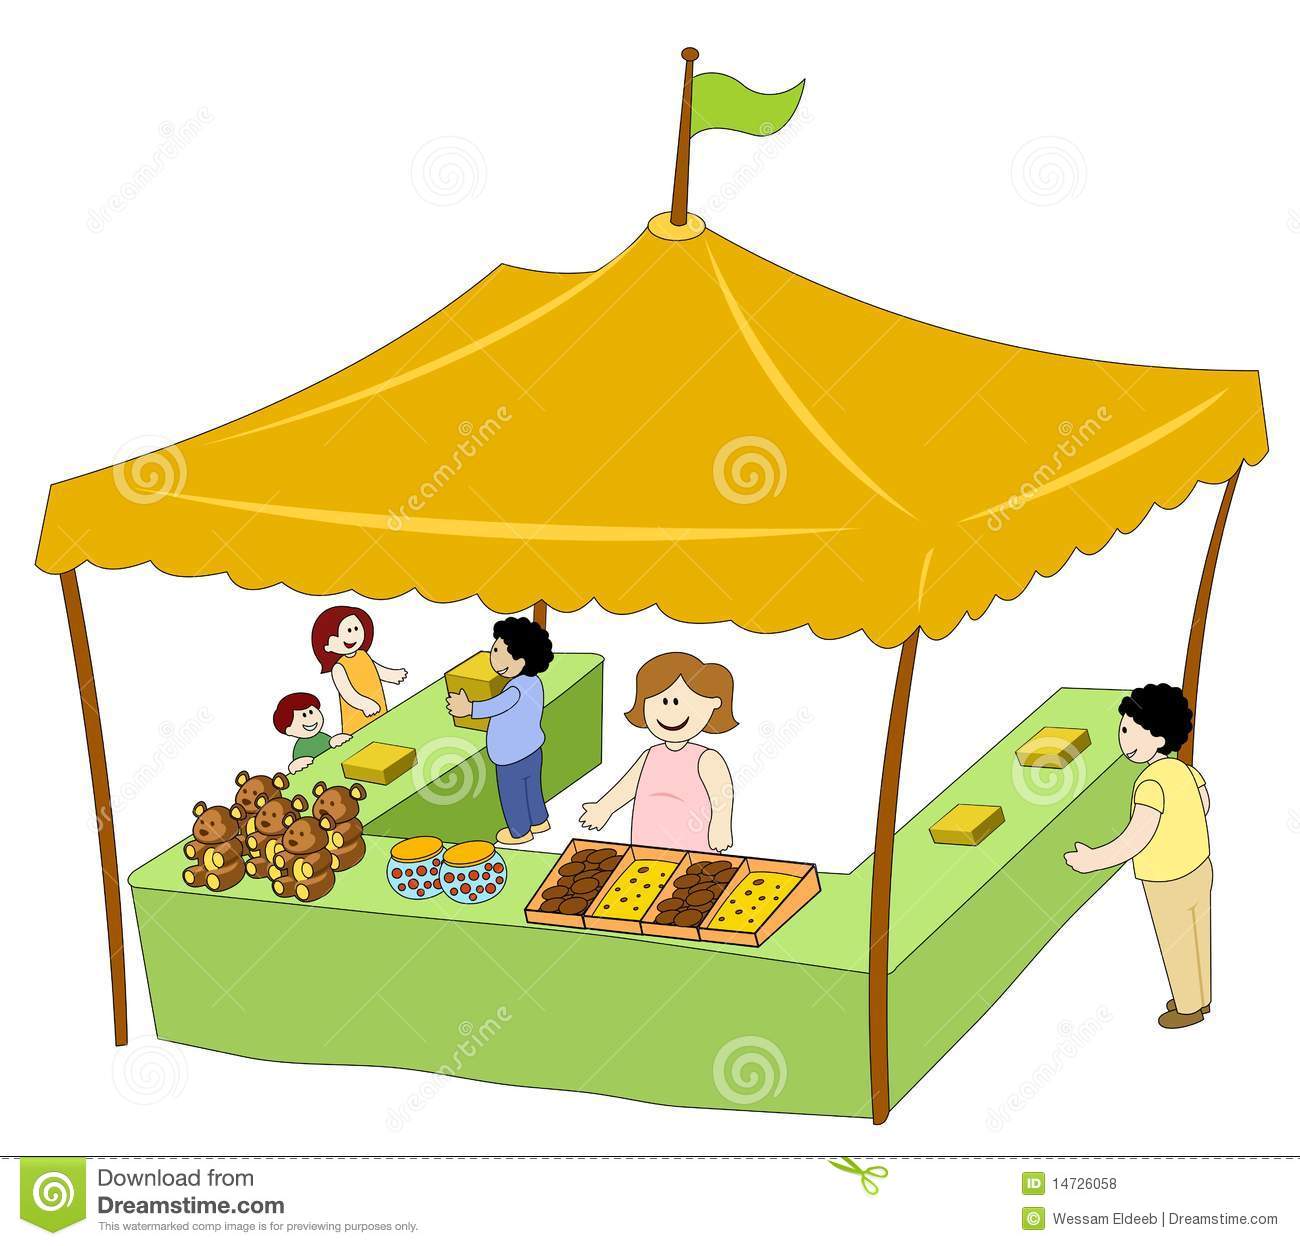 Food   Beverage Tent Royalty Free Stock Photos   Image  14726058